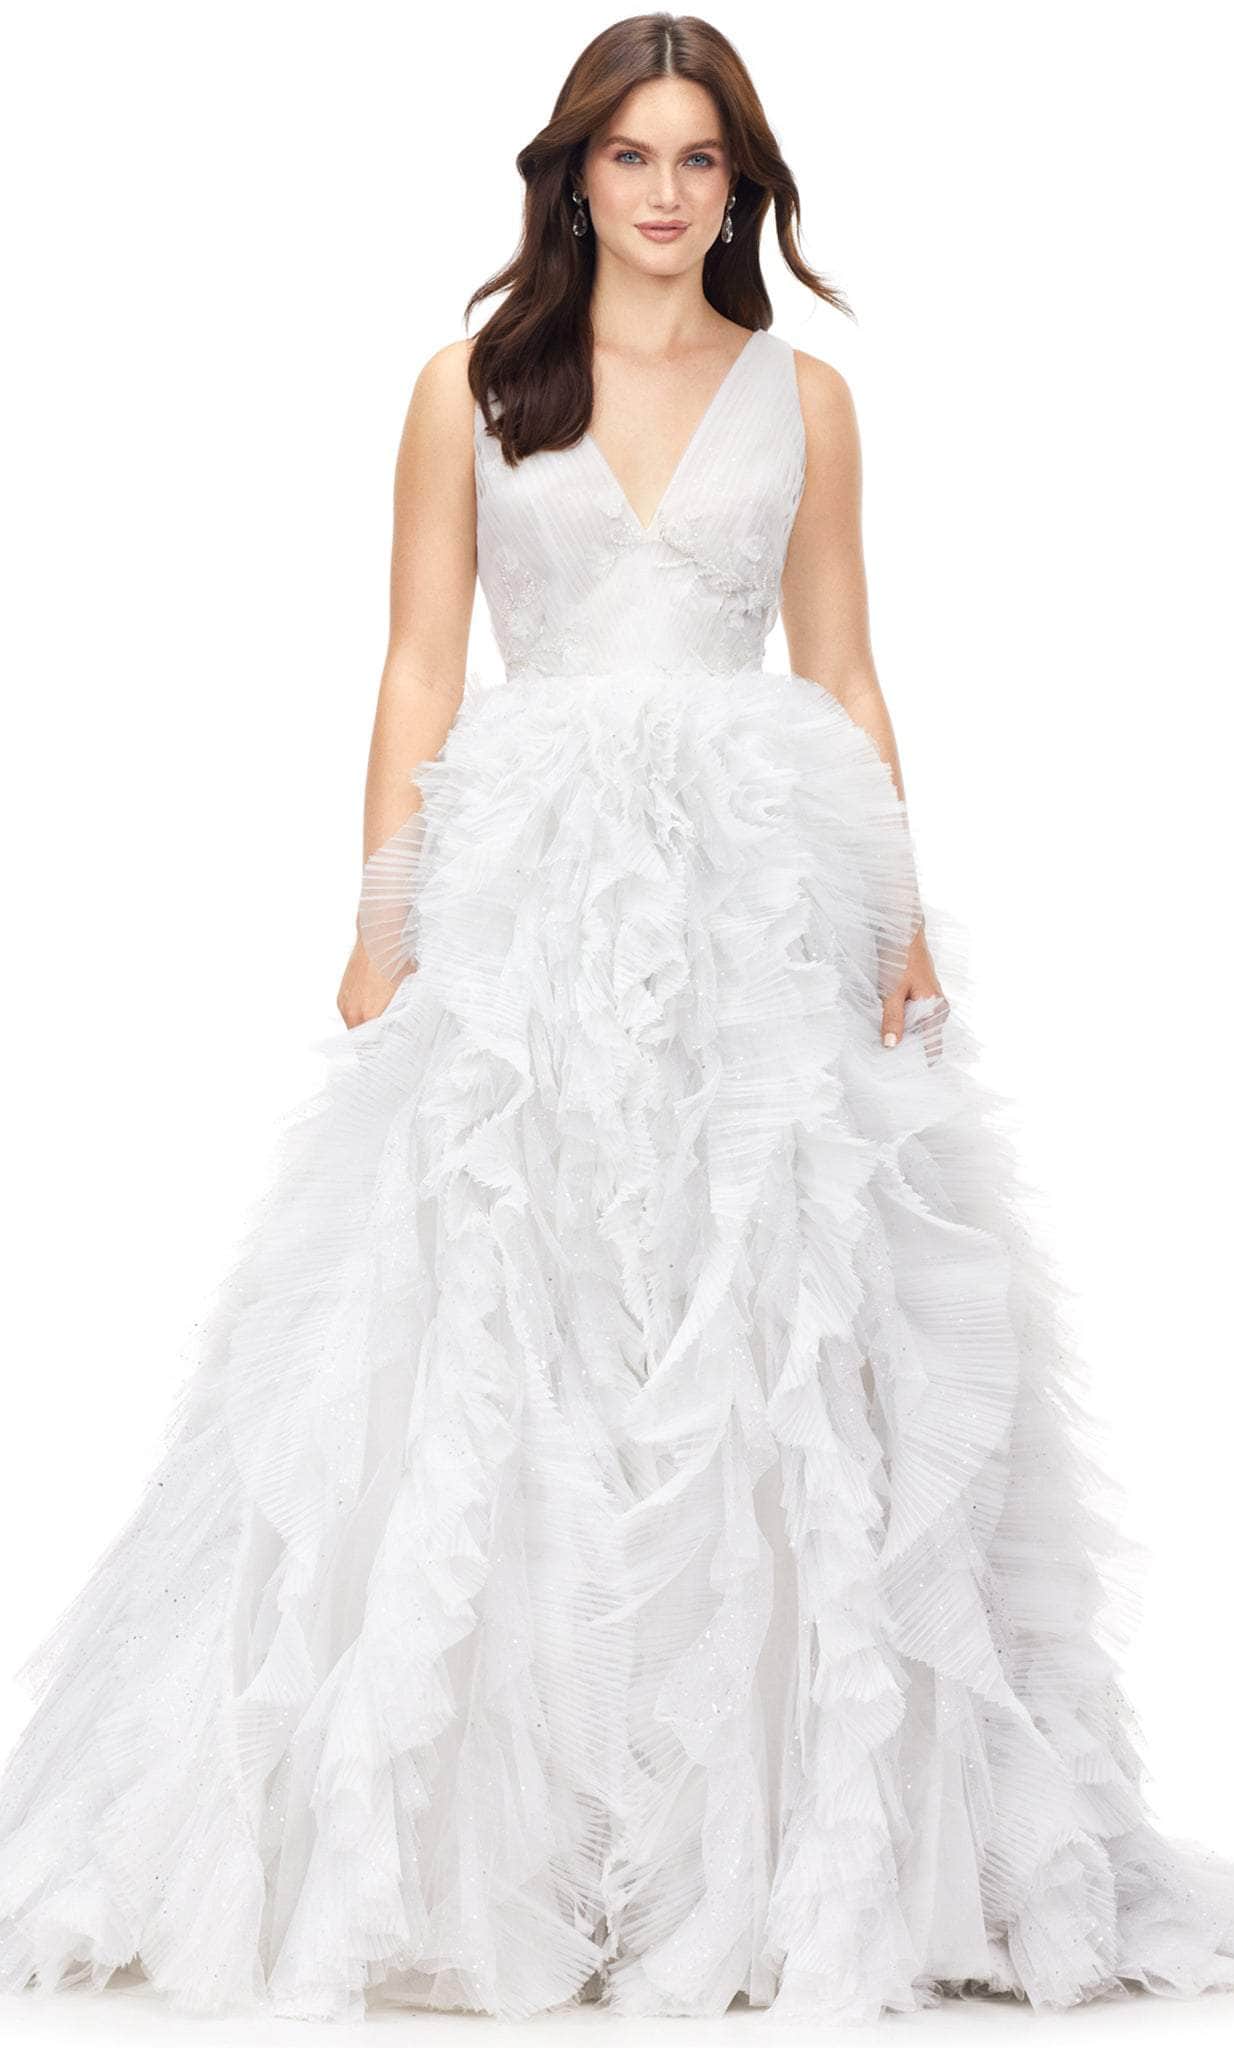 Ashley Lauren 11233 - A-line Ruffled Voluminous Tulle Gown Special Occasion Dress 0 / Ivory